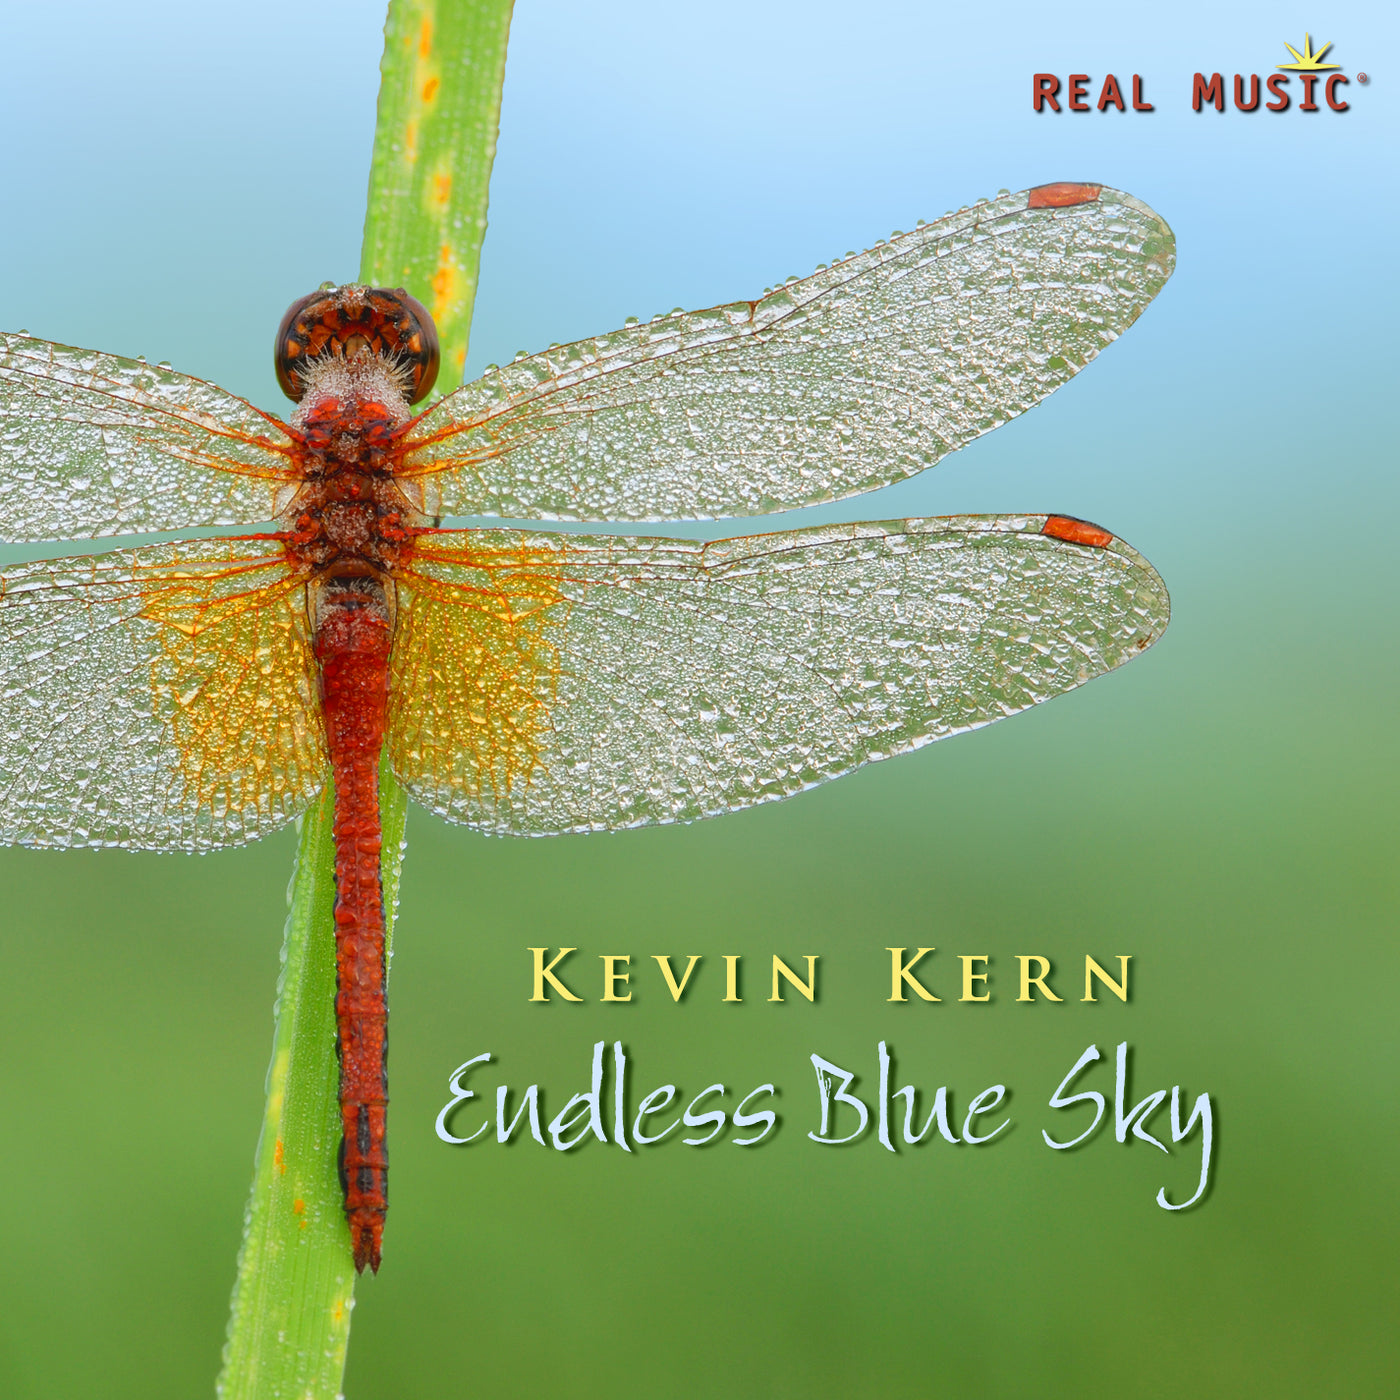 Endless Blue Sky by Kevin Kern, cd cover.